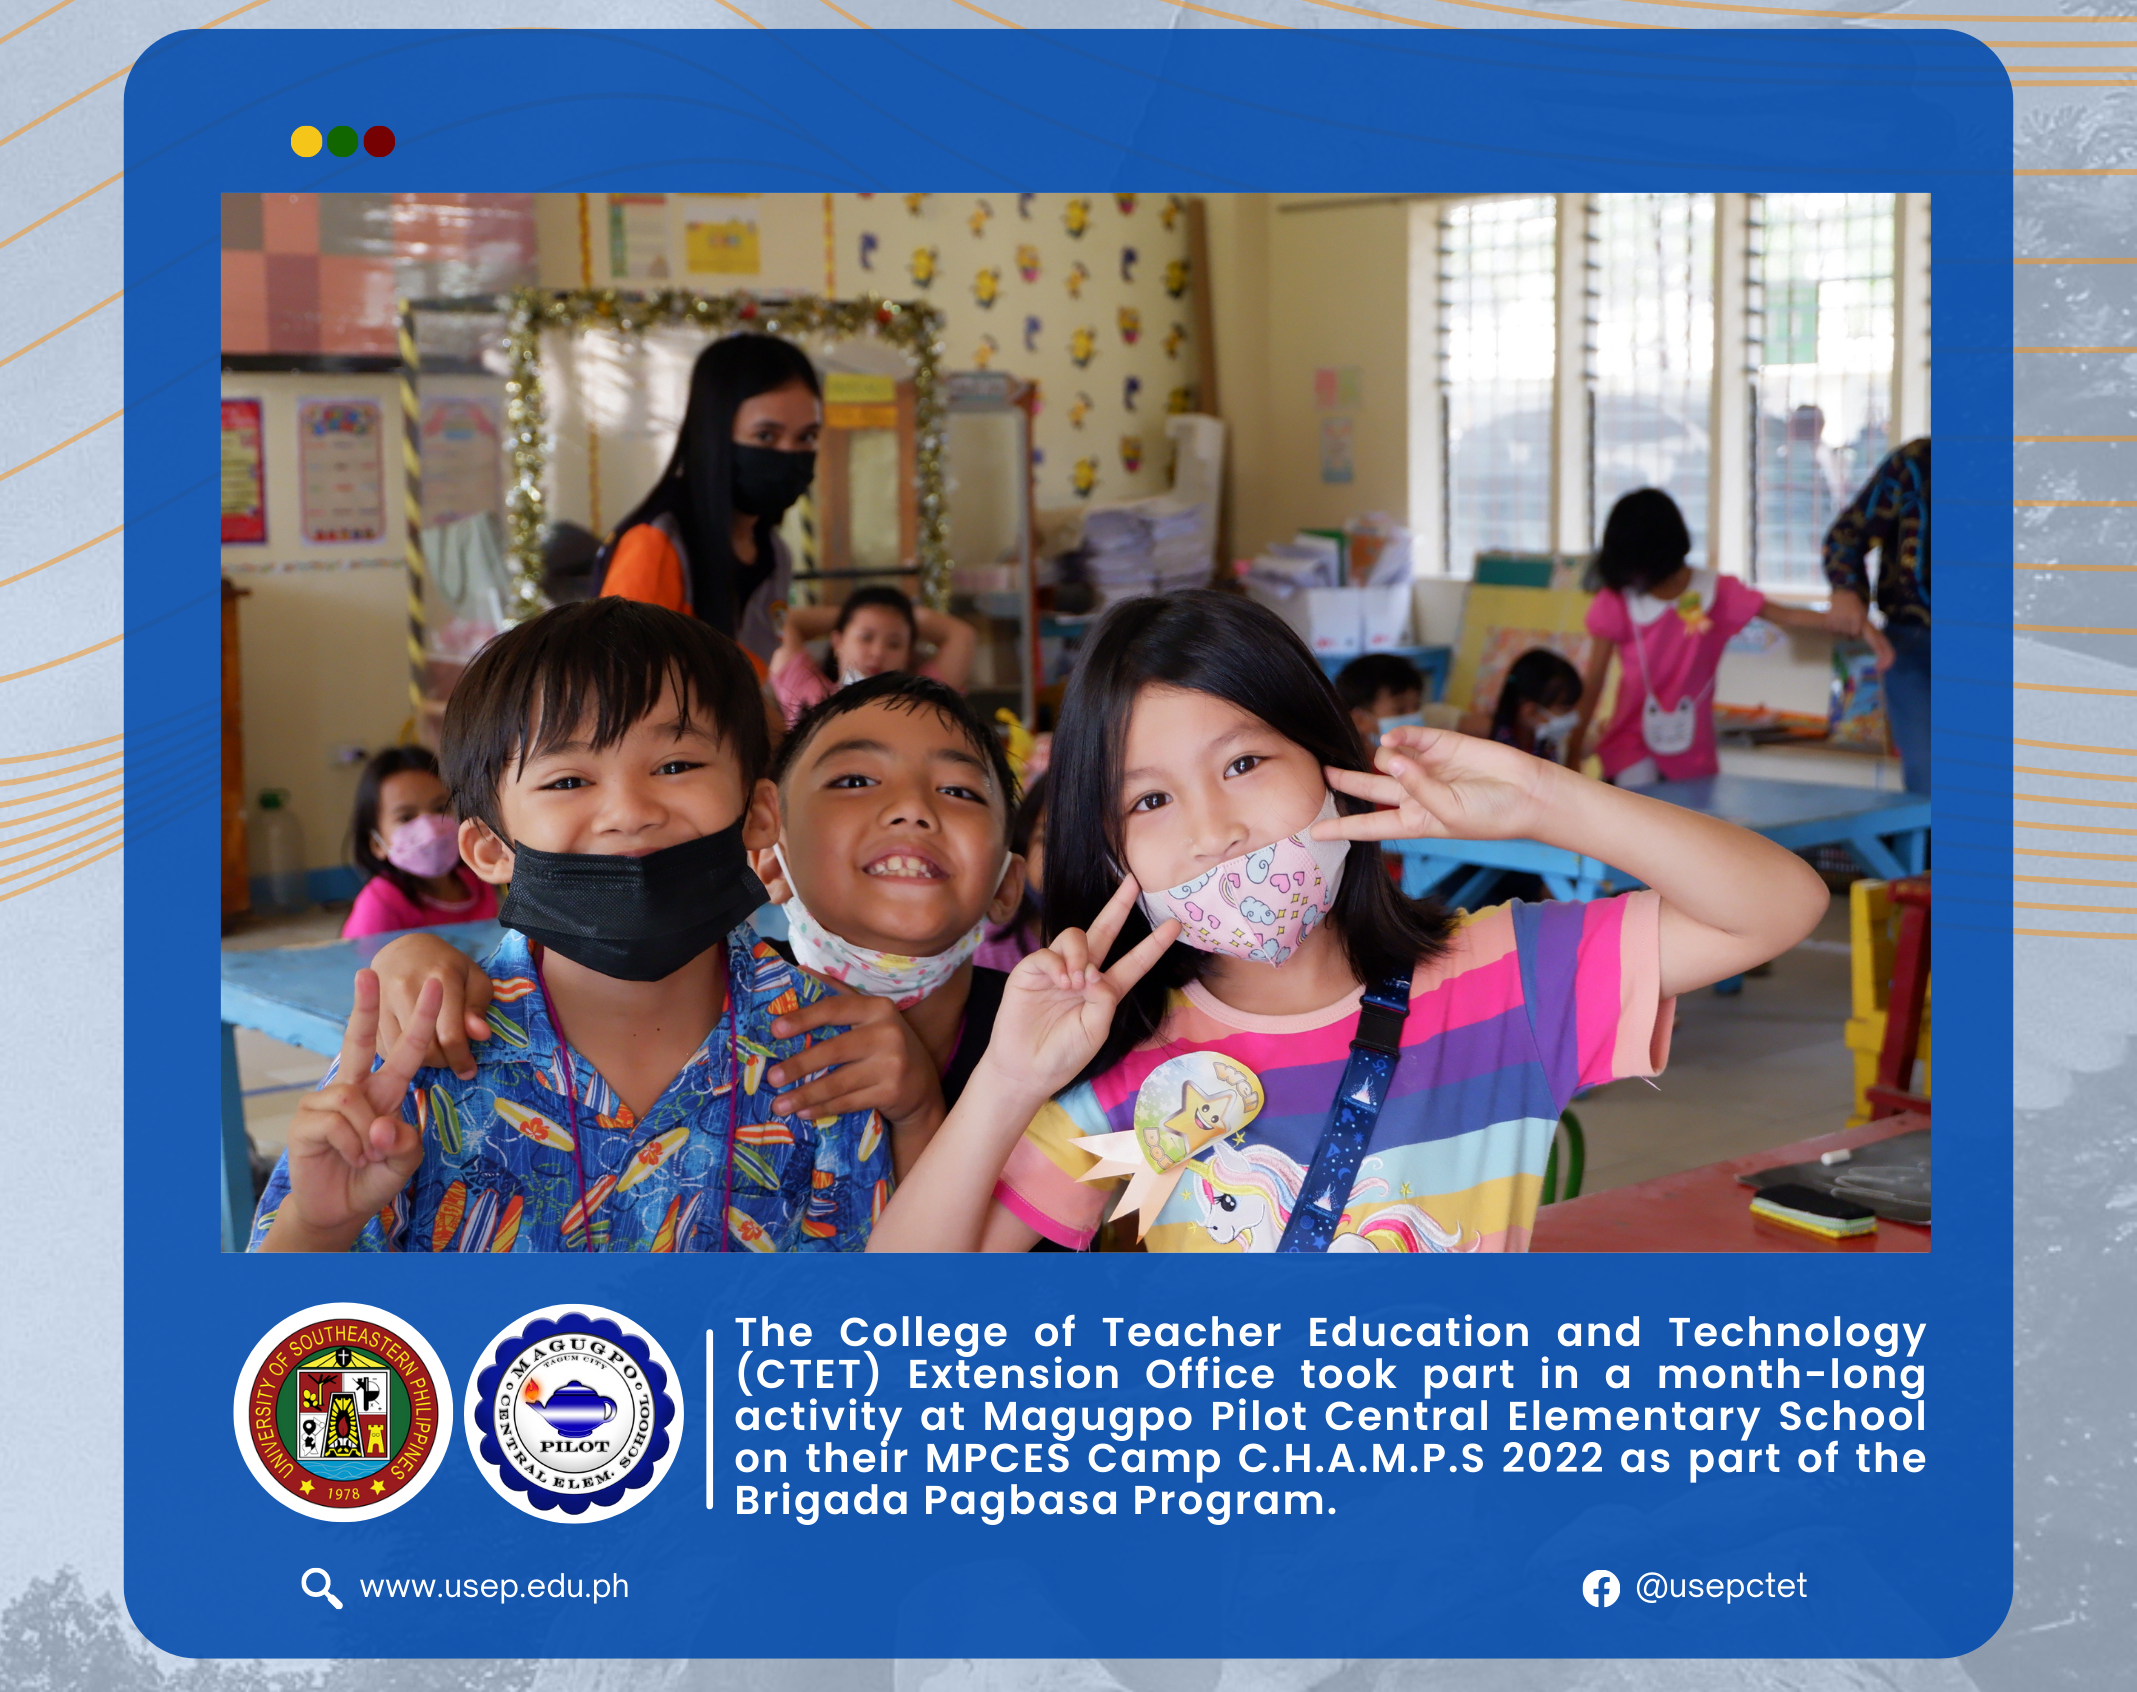 CTET Extension Office took part in a month-long activity at Magugpo Pilot Central Elementary School